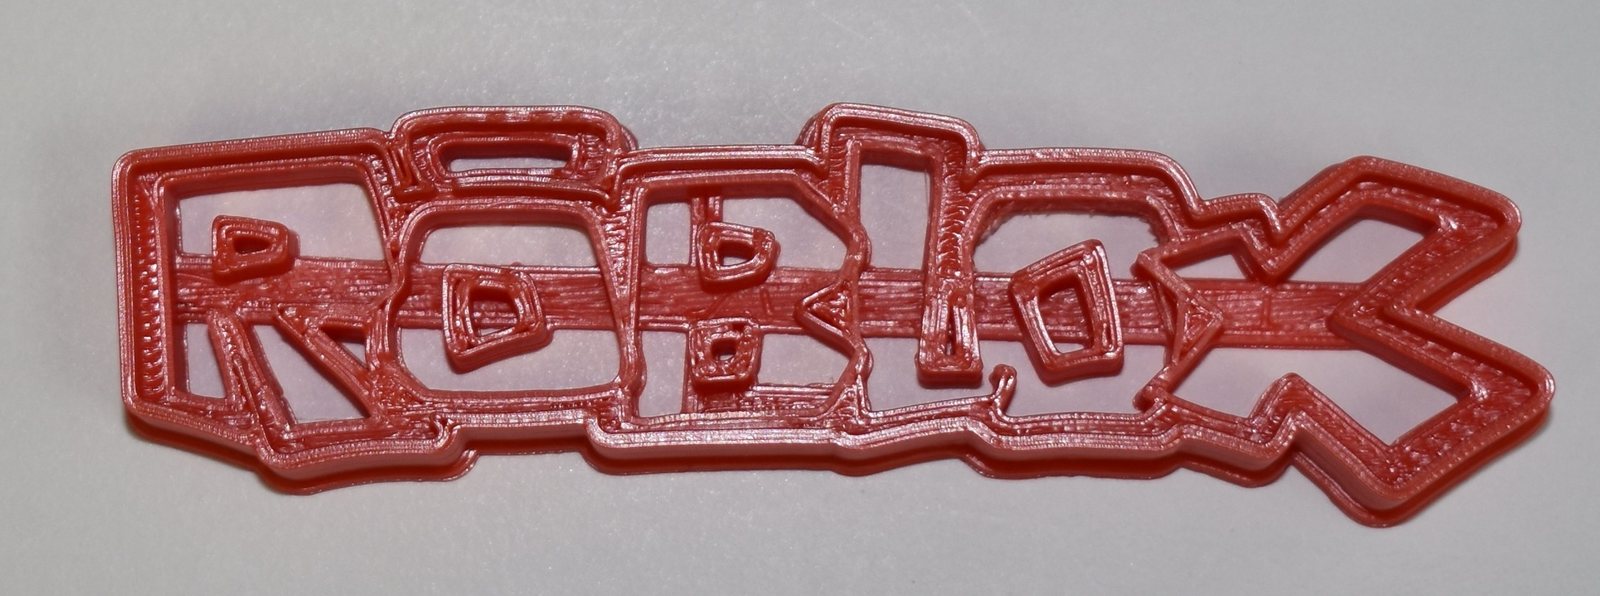 Theme of Roblox Letters Online Video Game Cookie Cutter Made in USA PR726 - $3.99